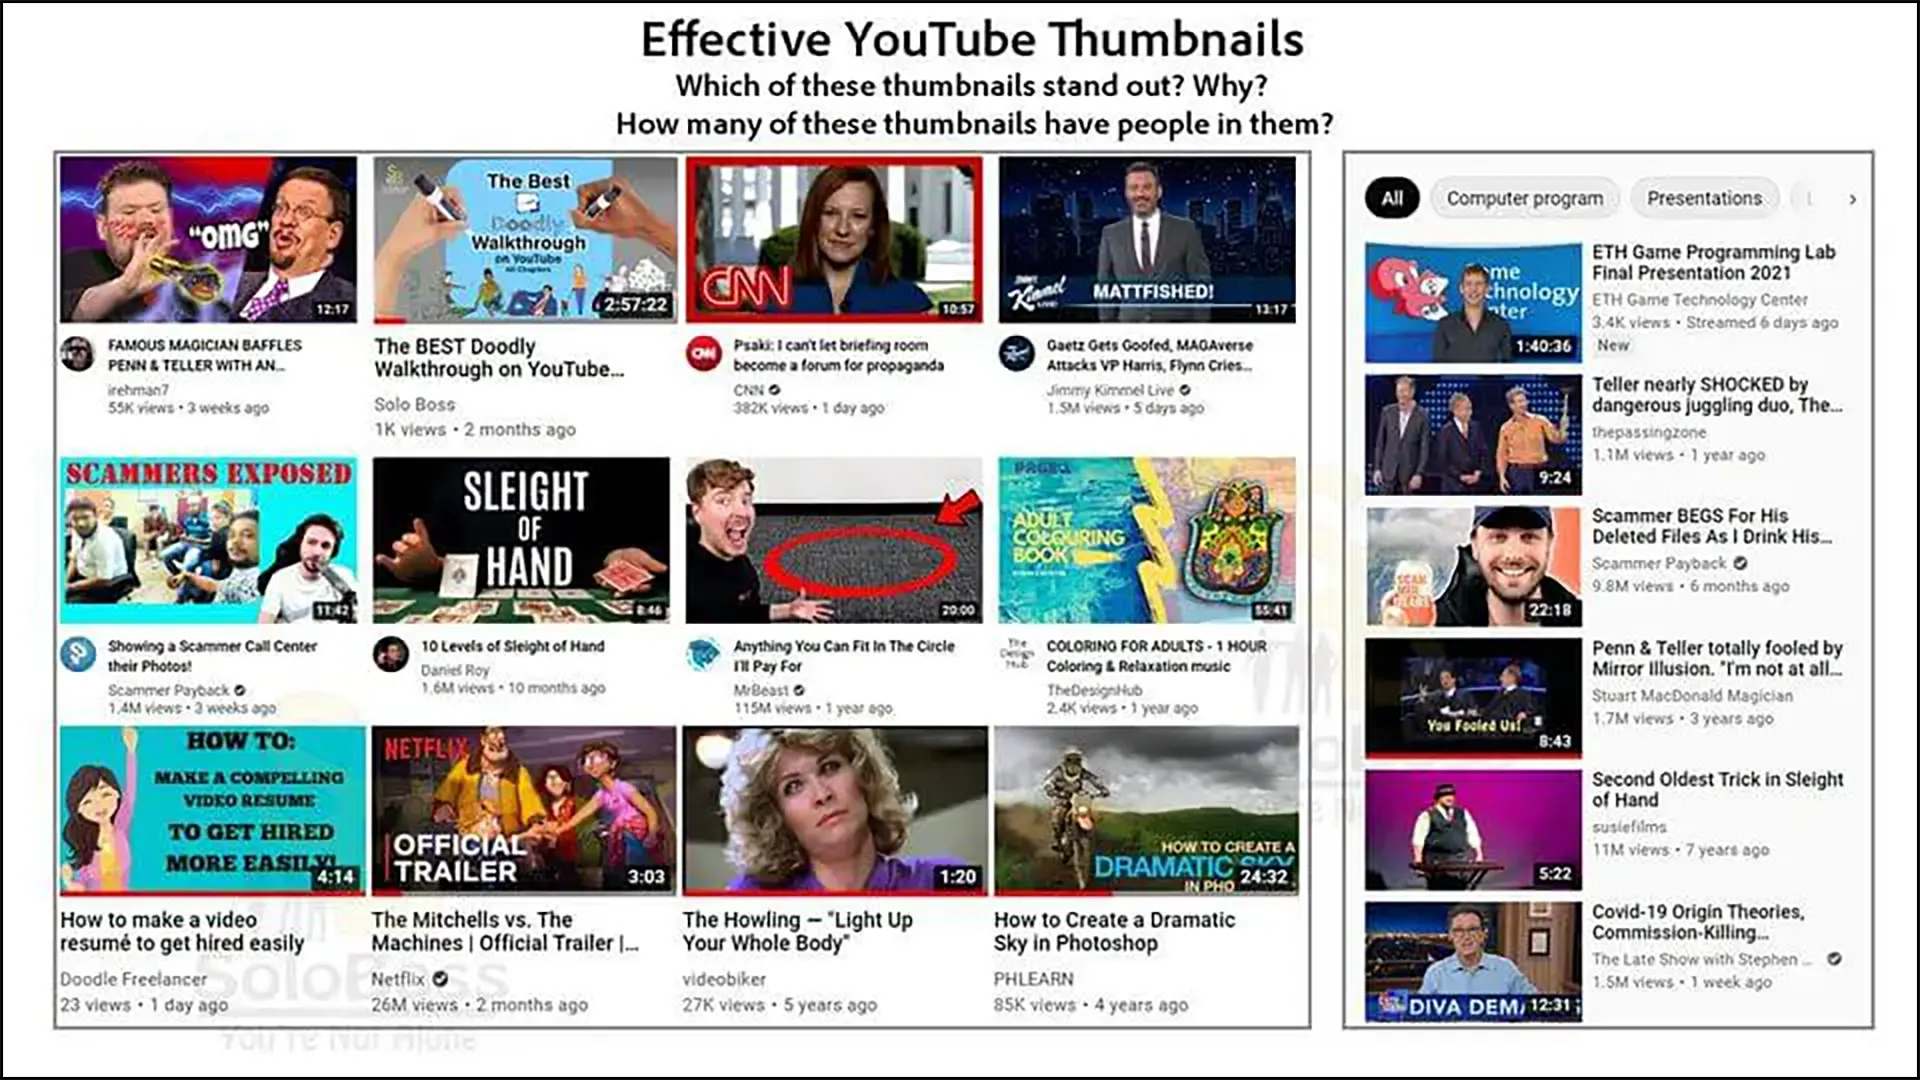 Demonstrates various types of effective thumbnails on YouTube.